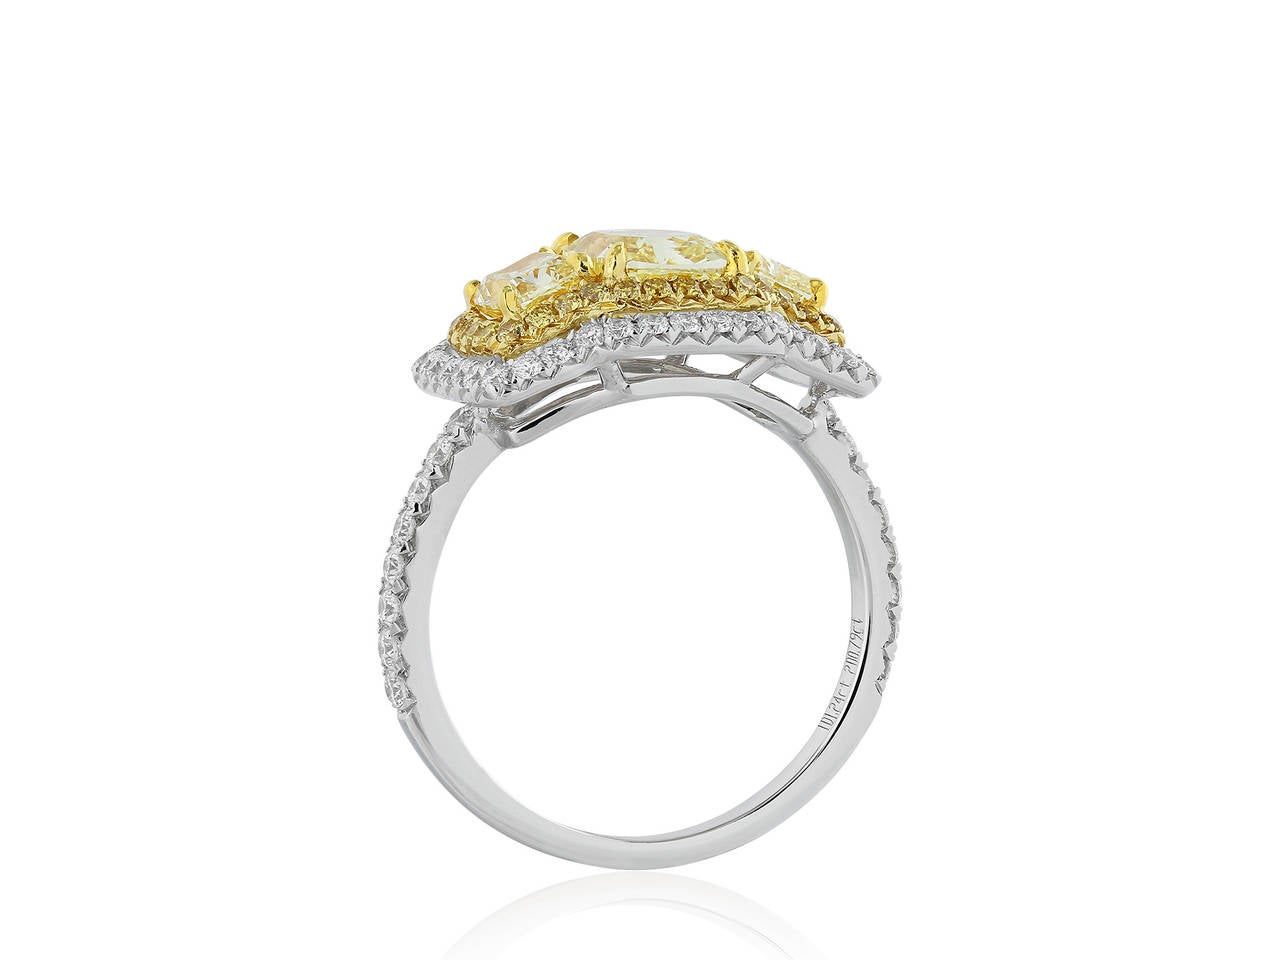 Two tone 18 karat yellow and white gold 3 stone ring consisting of consisting of 1 radiant cut canary diamond 1.24 carats having a color and clarify of FY/SI2 with GIA certificate #1162231615, the center stone is flanked by 2 radiant cut canary